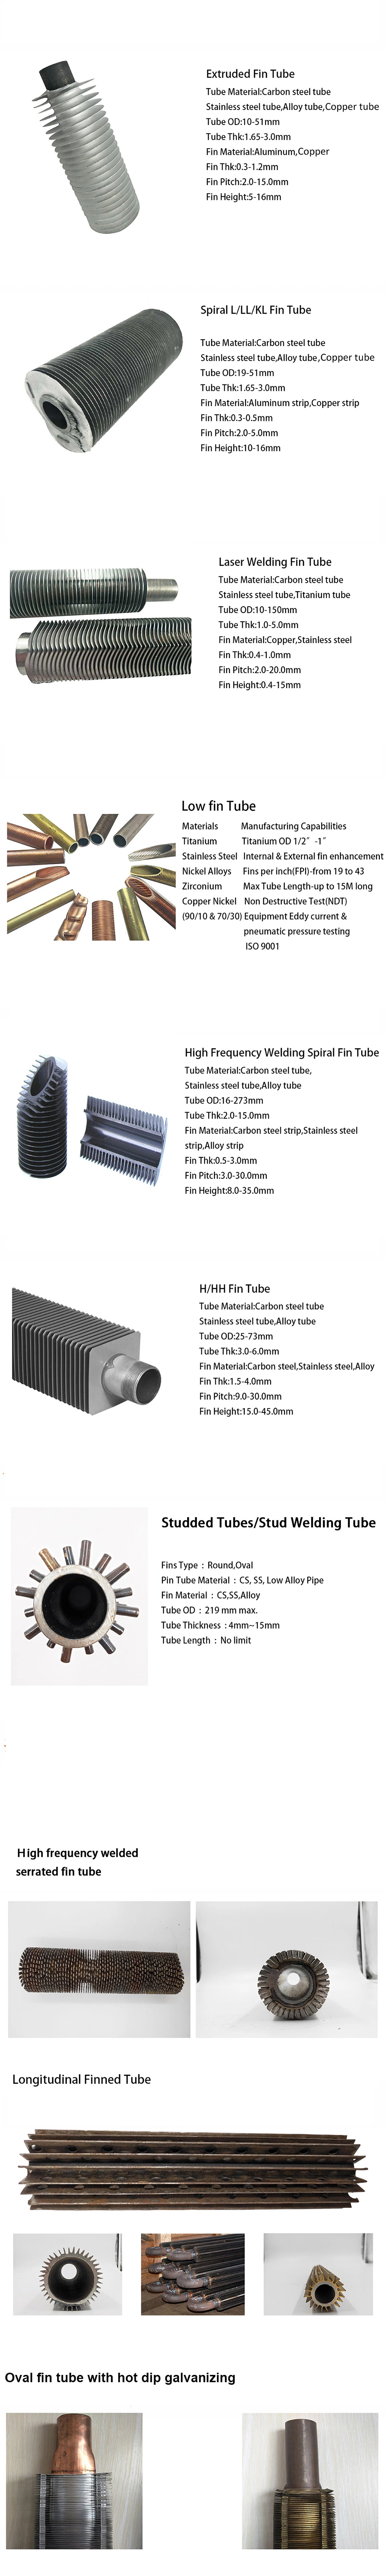 China Factory Price High Quality Frequency Industrial Refrigeration &amp; Stainless Steel Welded Helical Extruded Spiral Fin/Finned Plate Brazed Heat Exchanger Tube